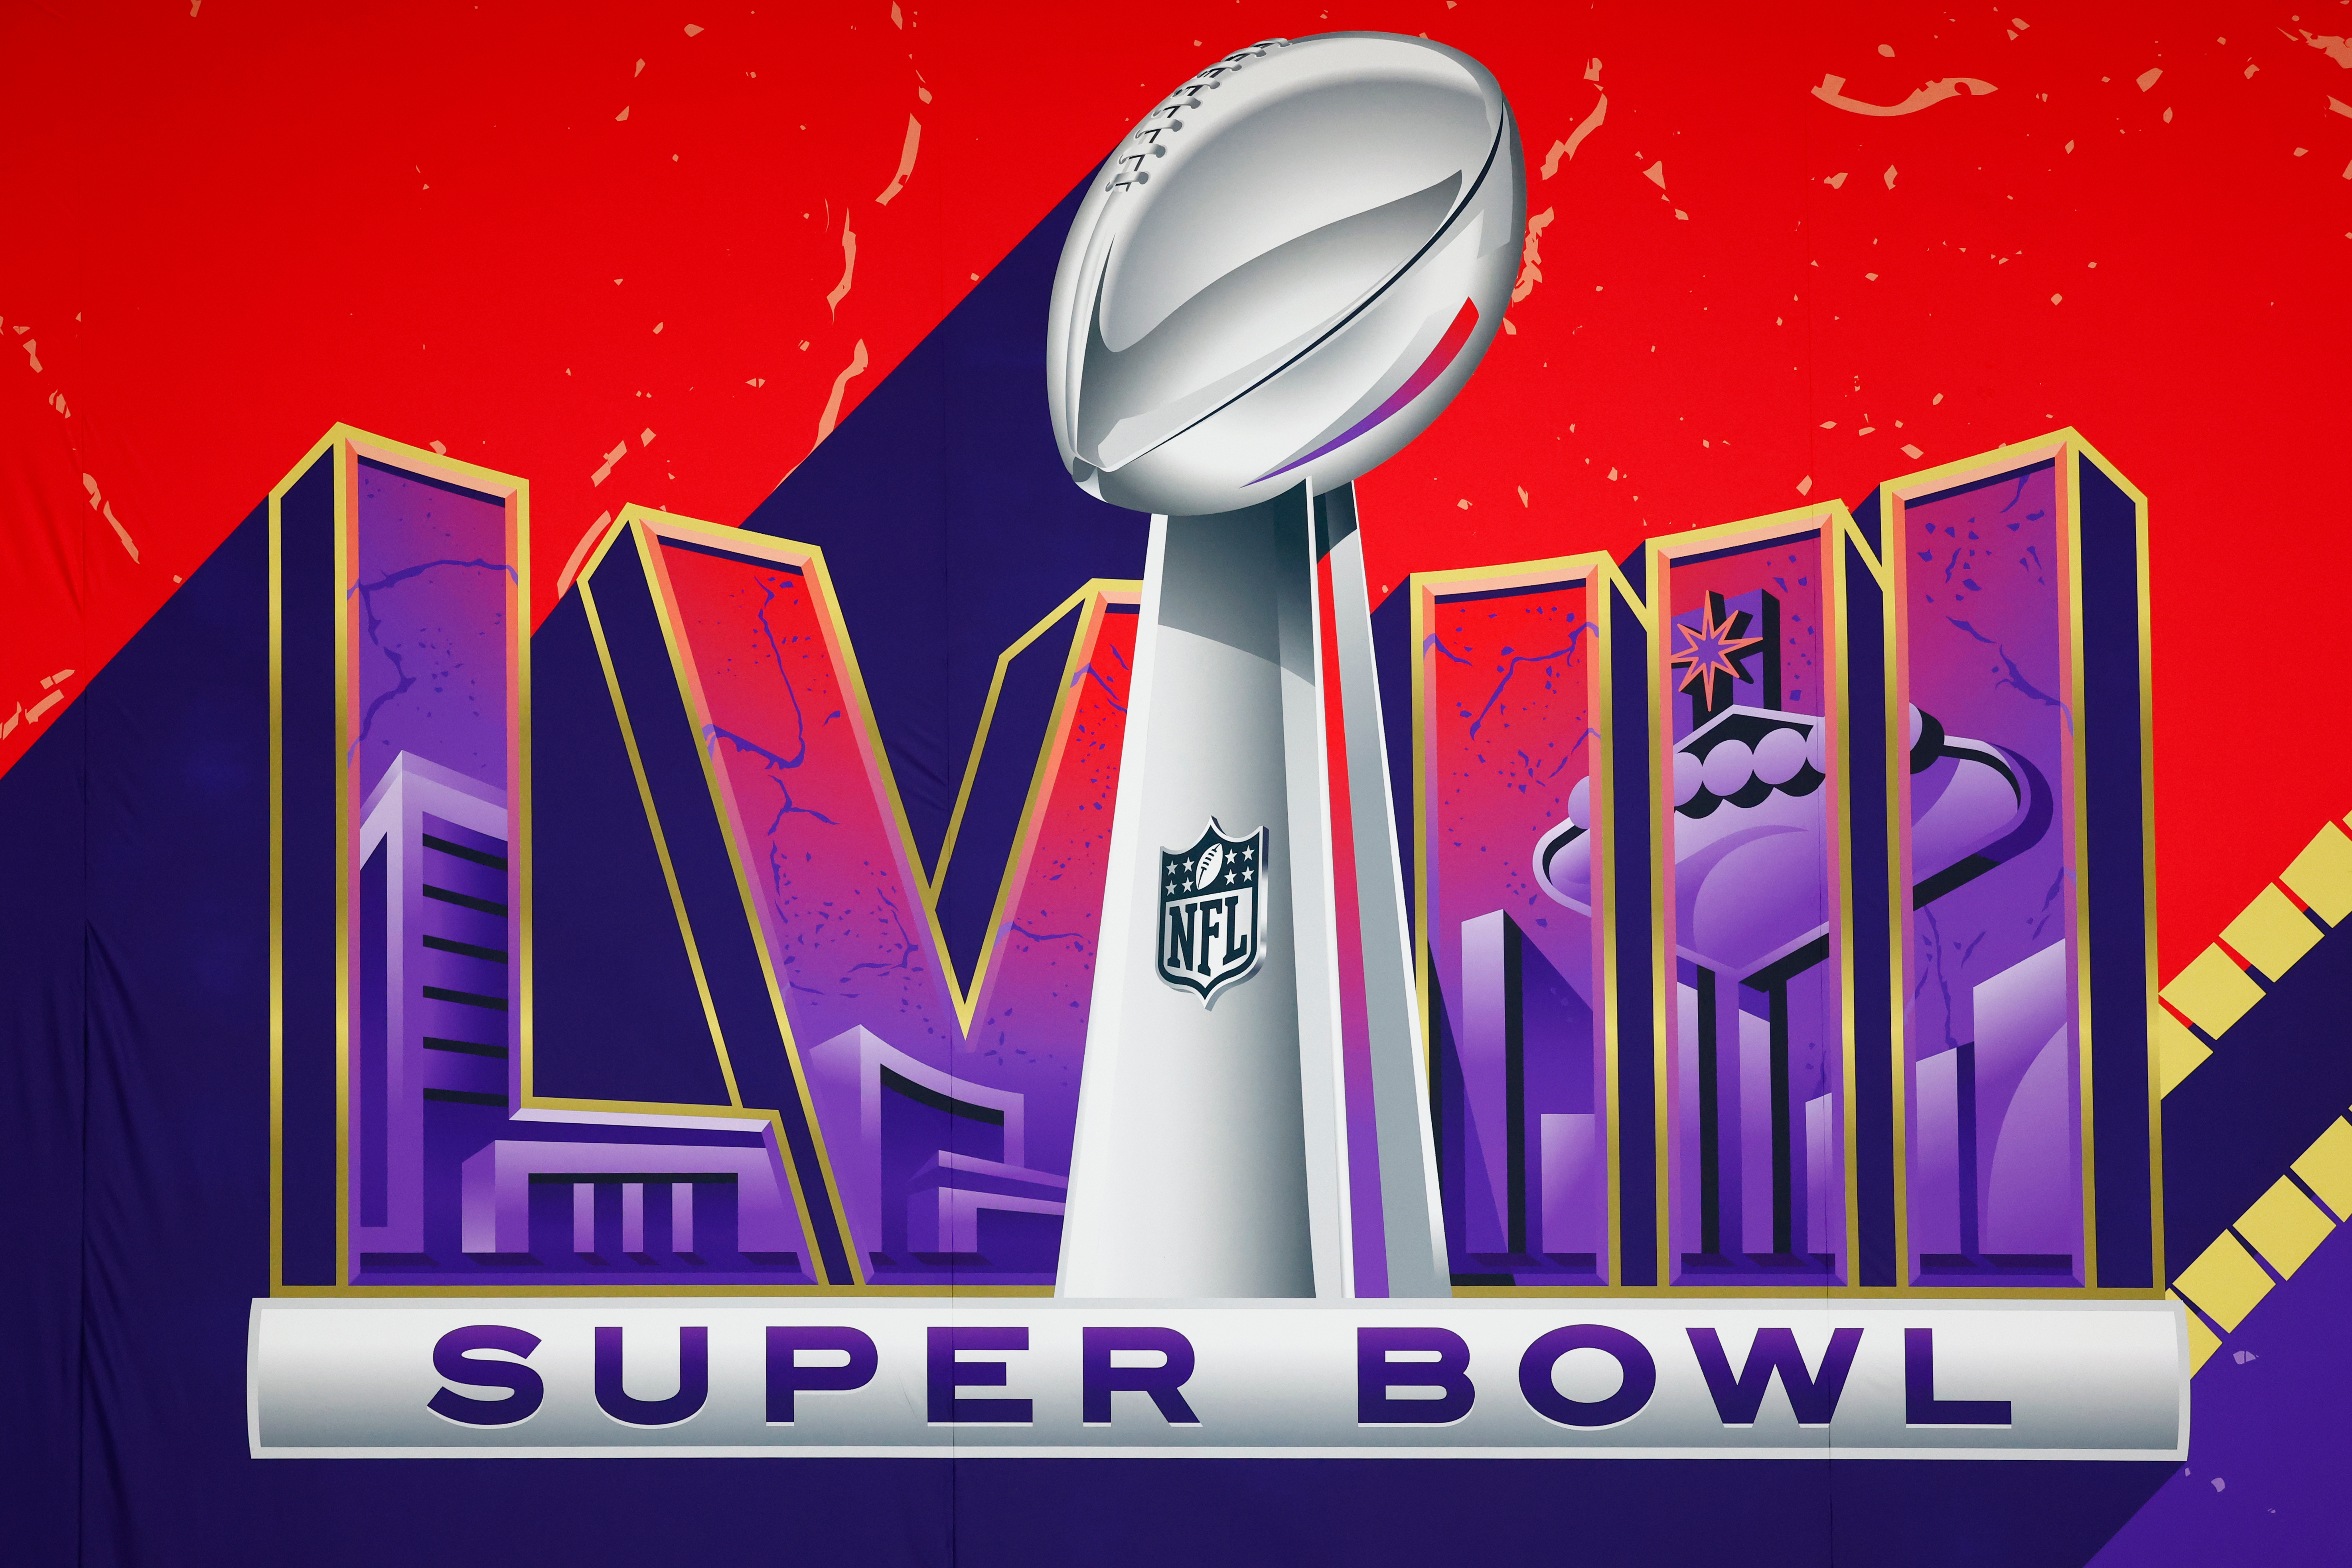 The Super Bowl LVIII is taking over Las Vegas this weekend with thousands heading to Sin City